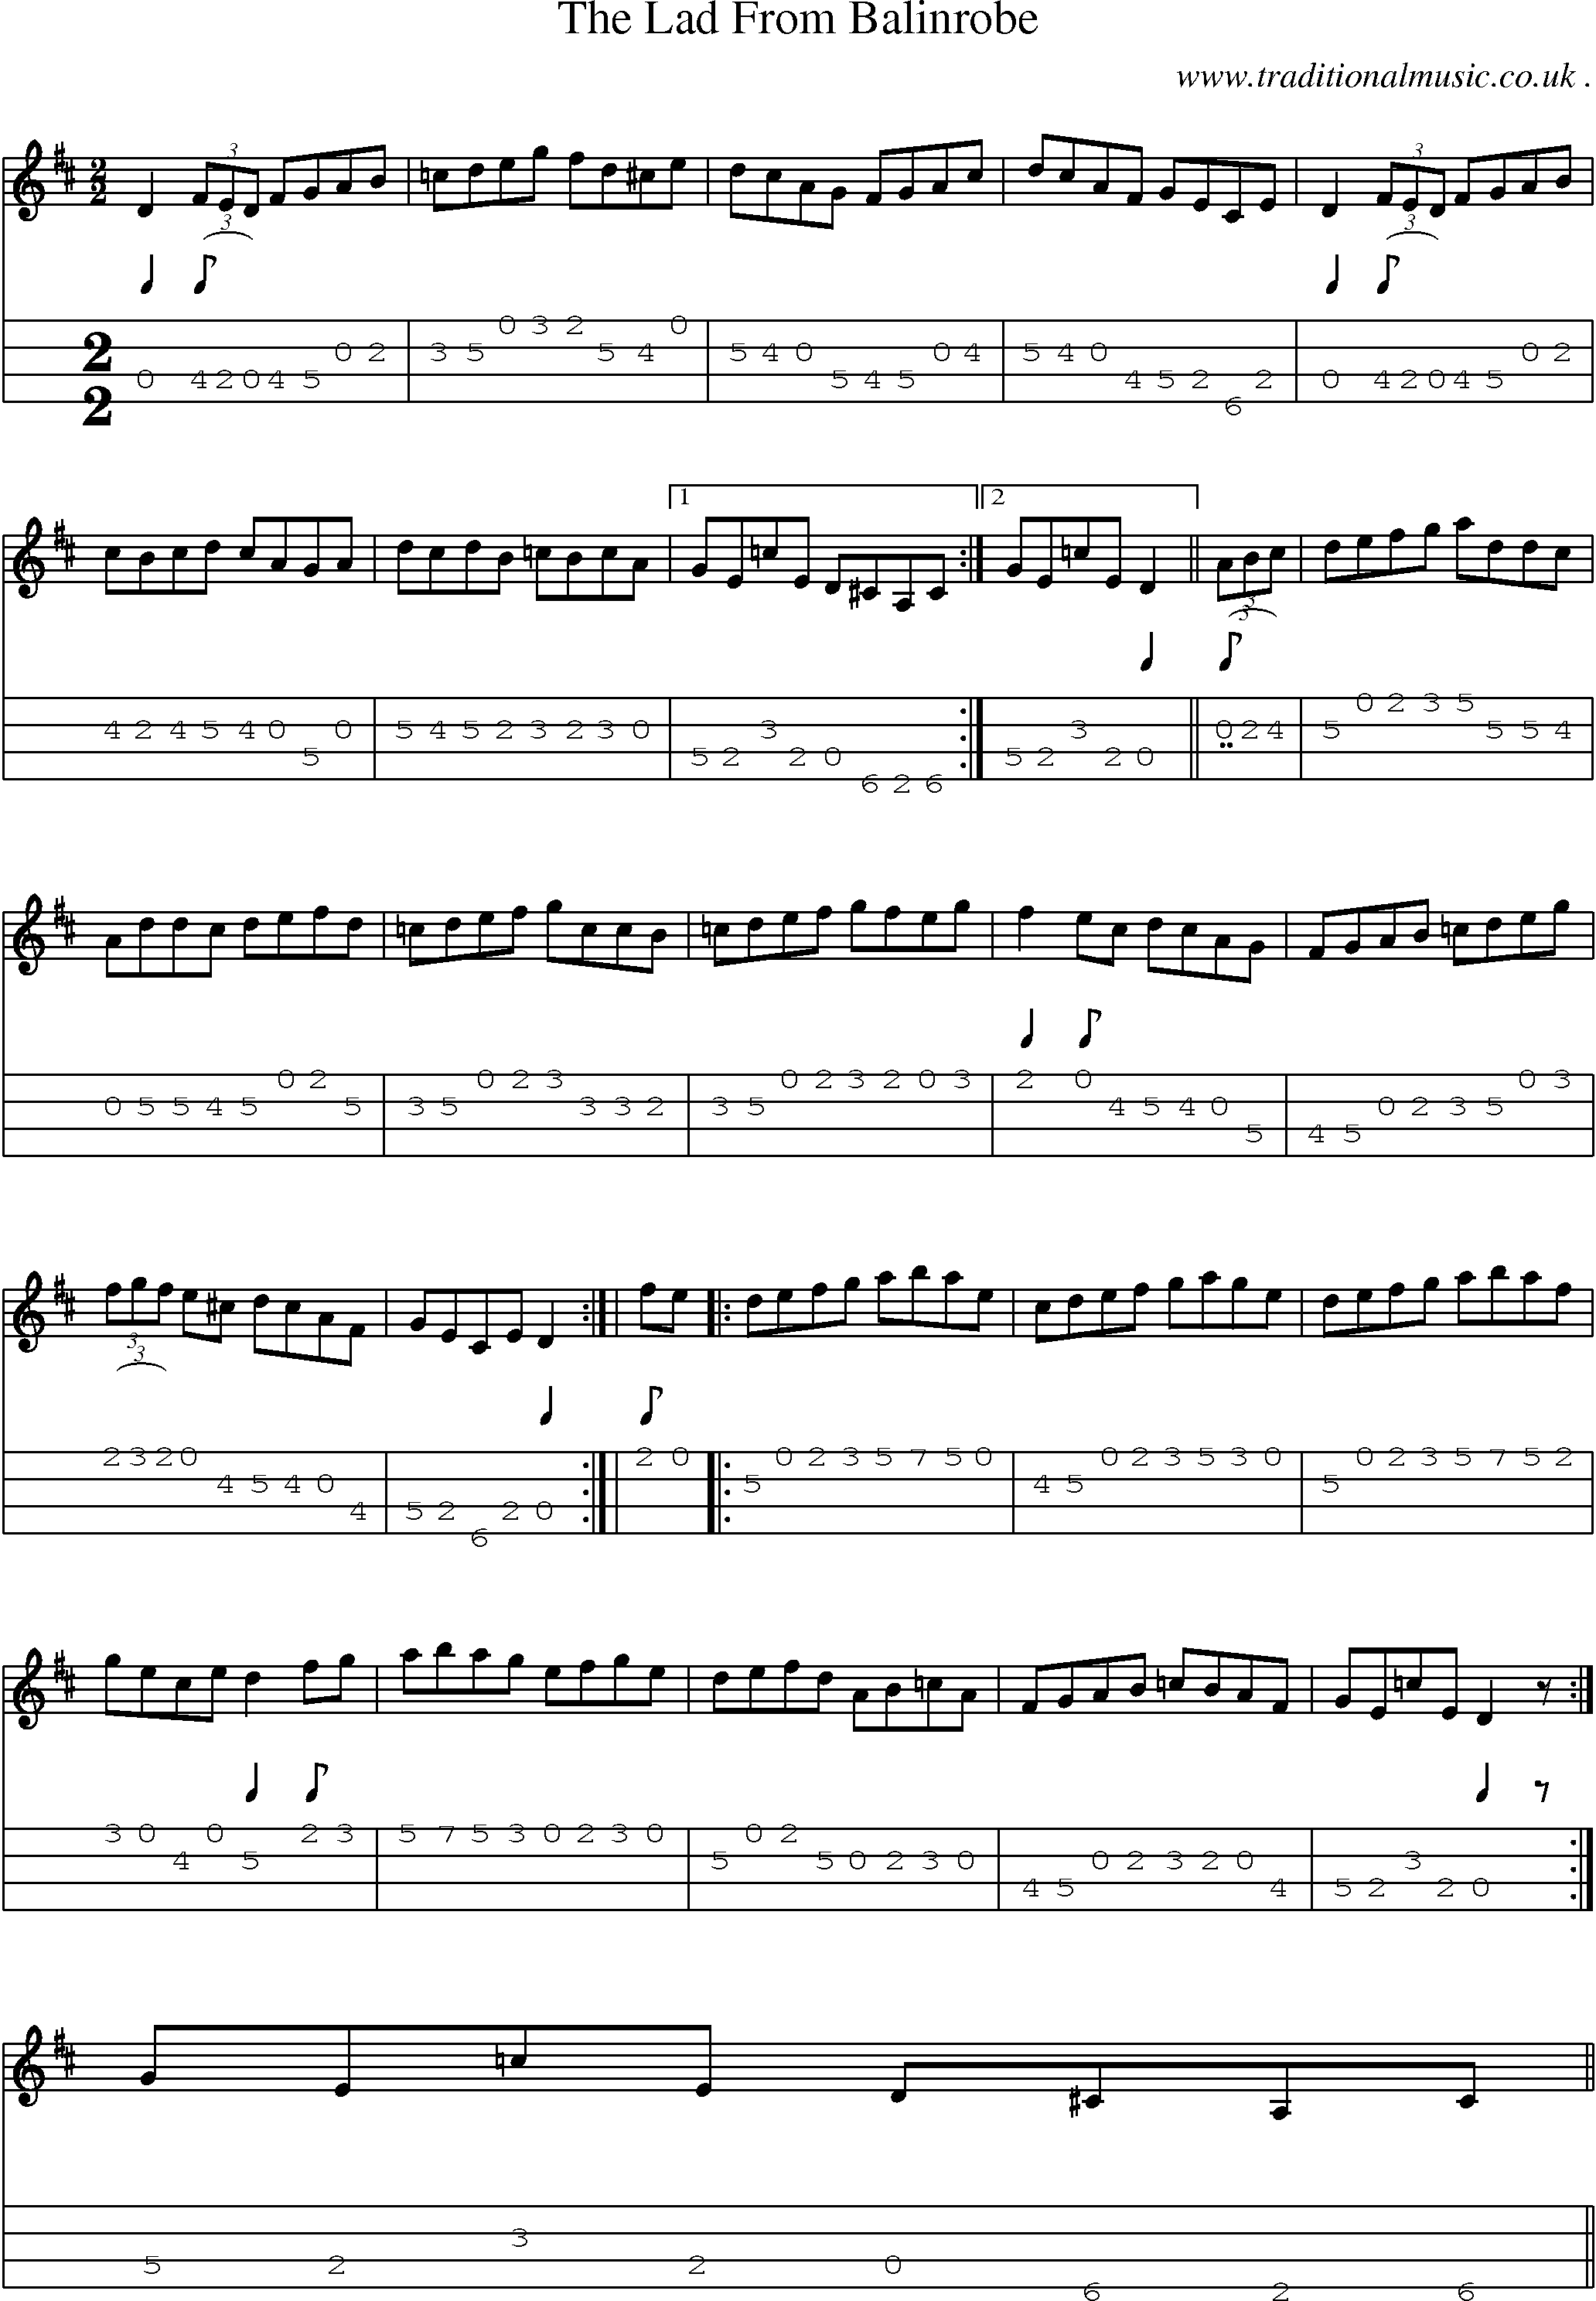 Sheet-Music and Mandolin Tabs for The Lad From Balinrobe